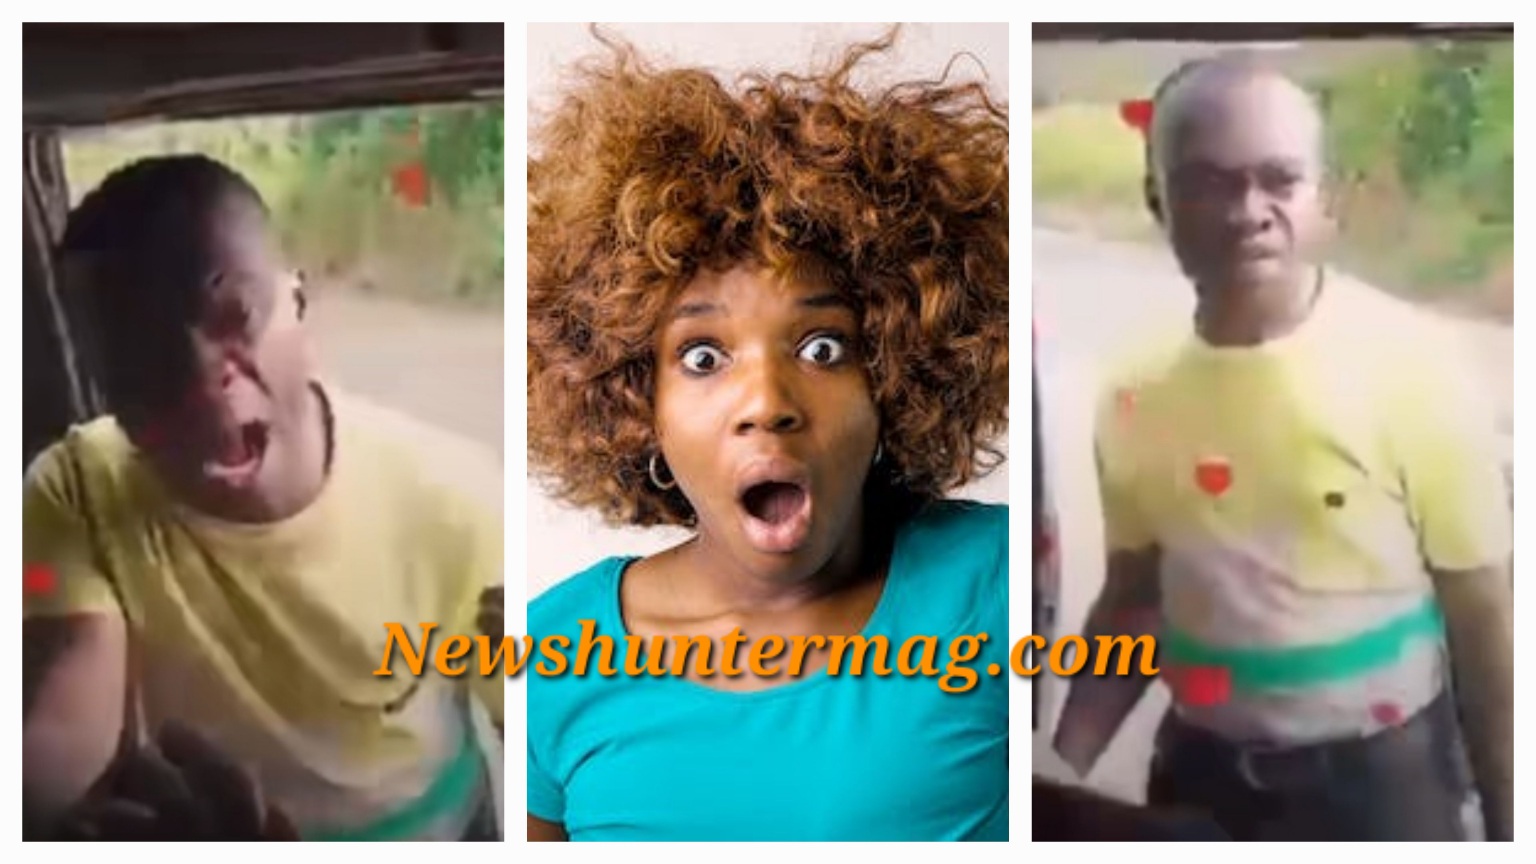 A Nigerian evangelist has made a shocking statement about men impregnating their wives.